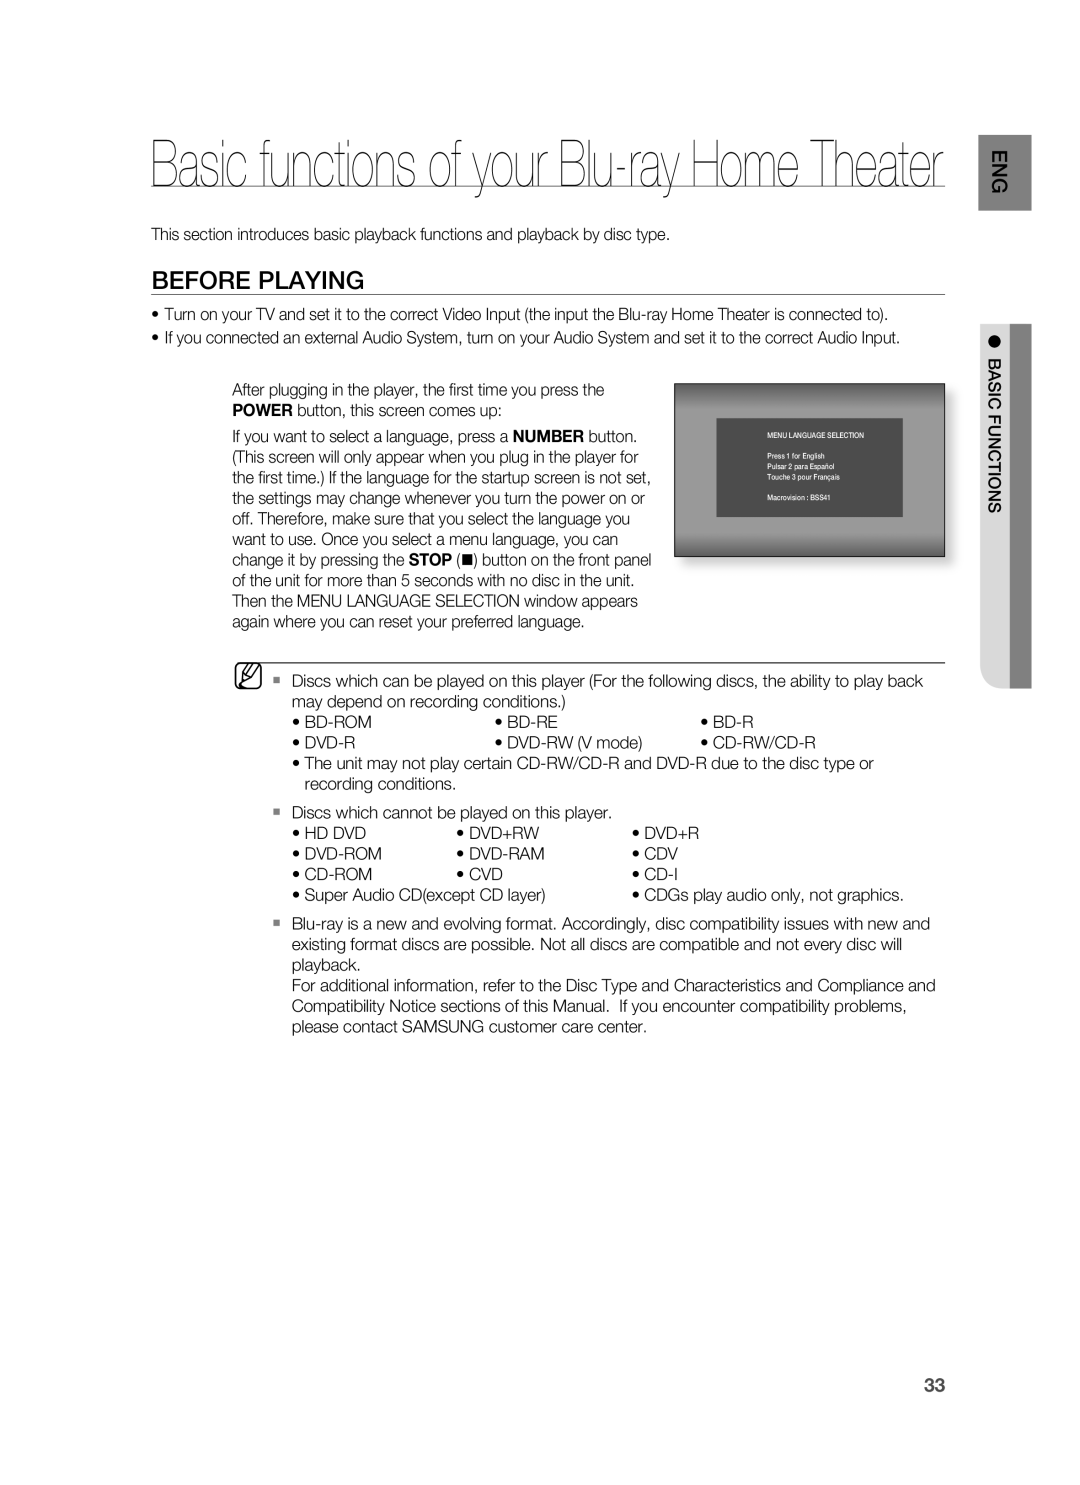 Samsung HT-BD1200, AH68-02178Z user manual Before Playing, Basic functions of your Blu-ray Home Theater 